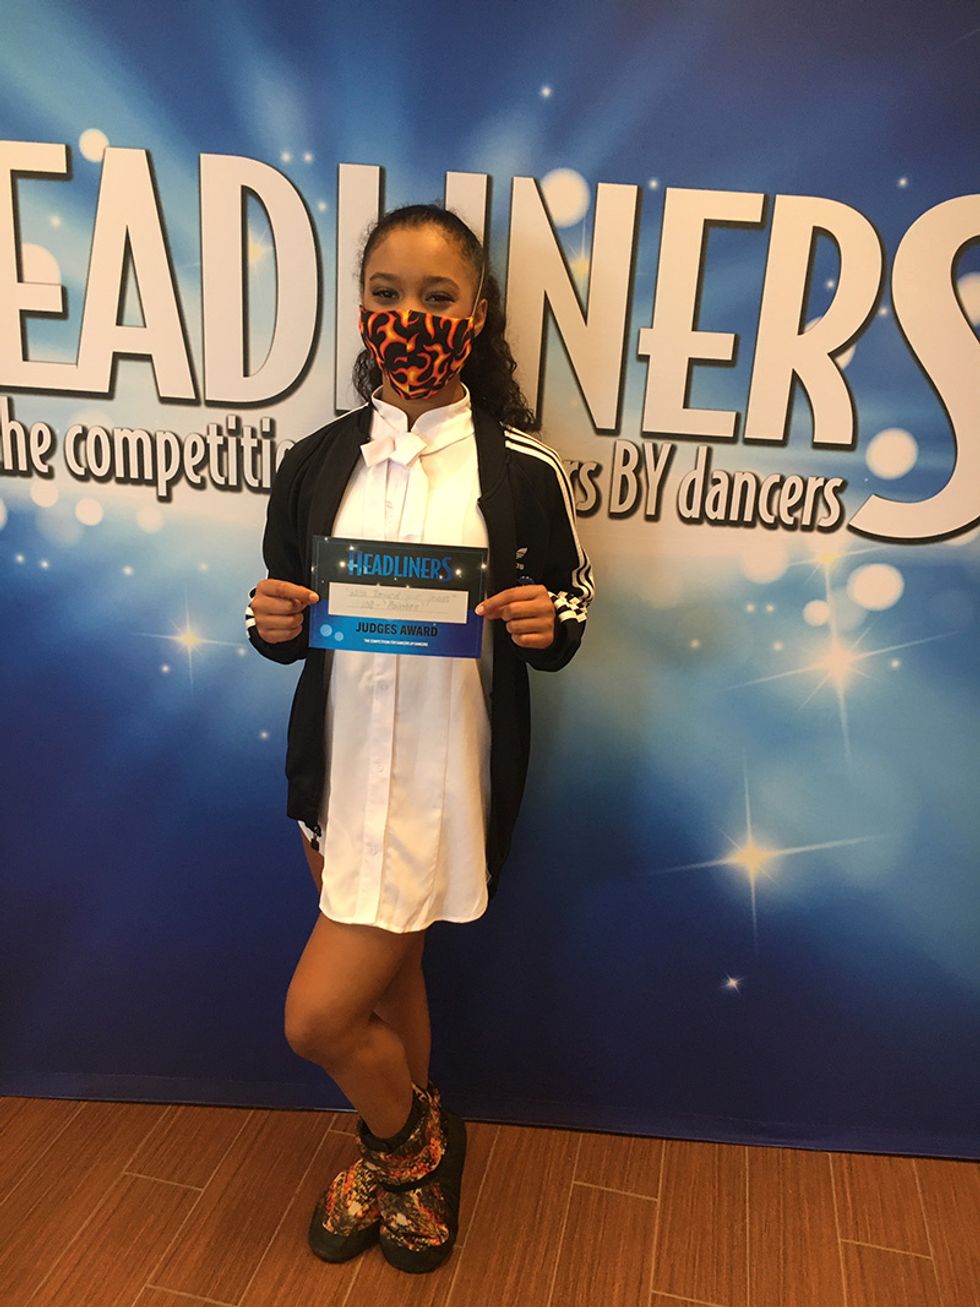 A young masked dancer standing against a Headliners backdrop holds a certificate that says "Headliners Judge's Award"